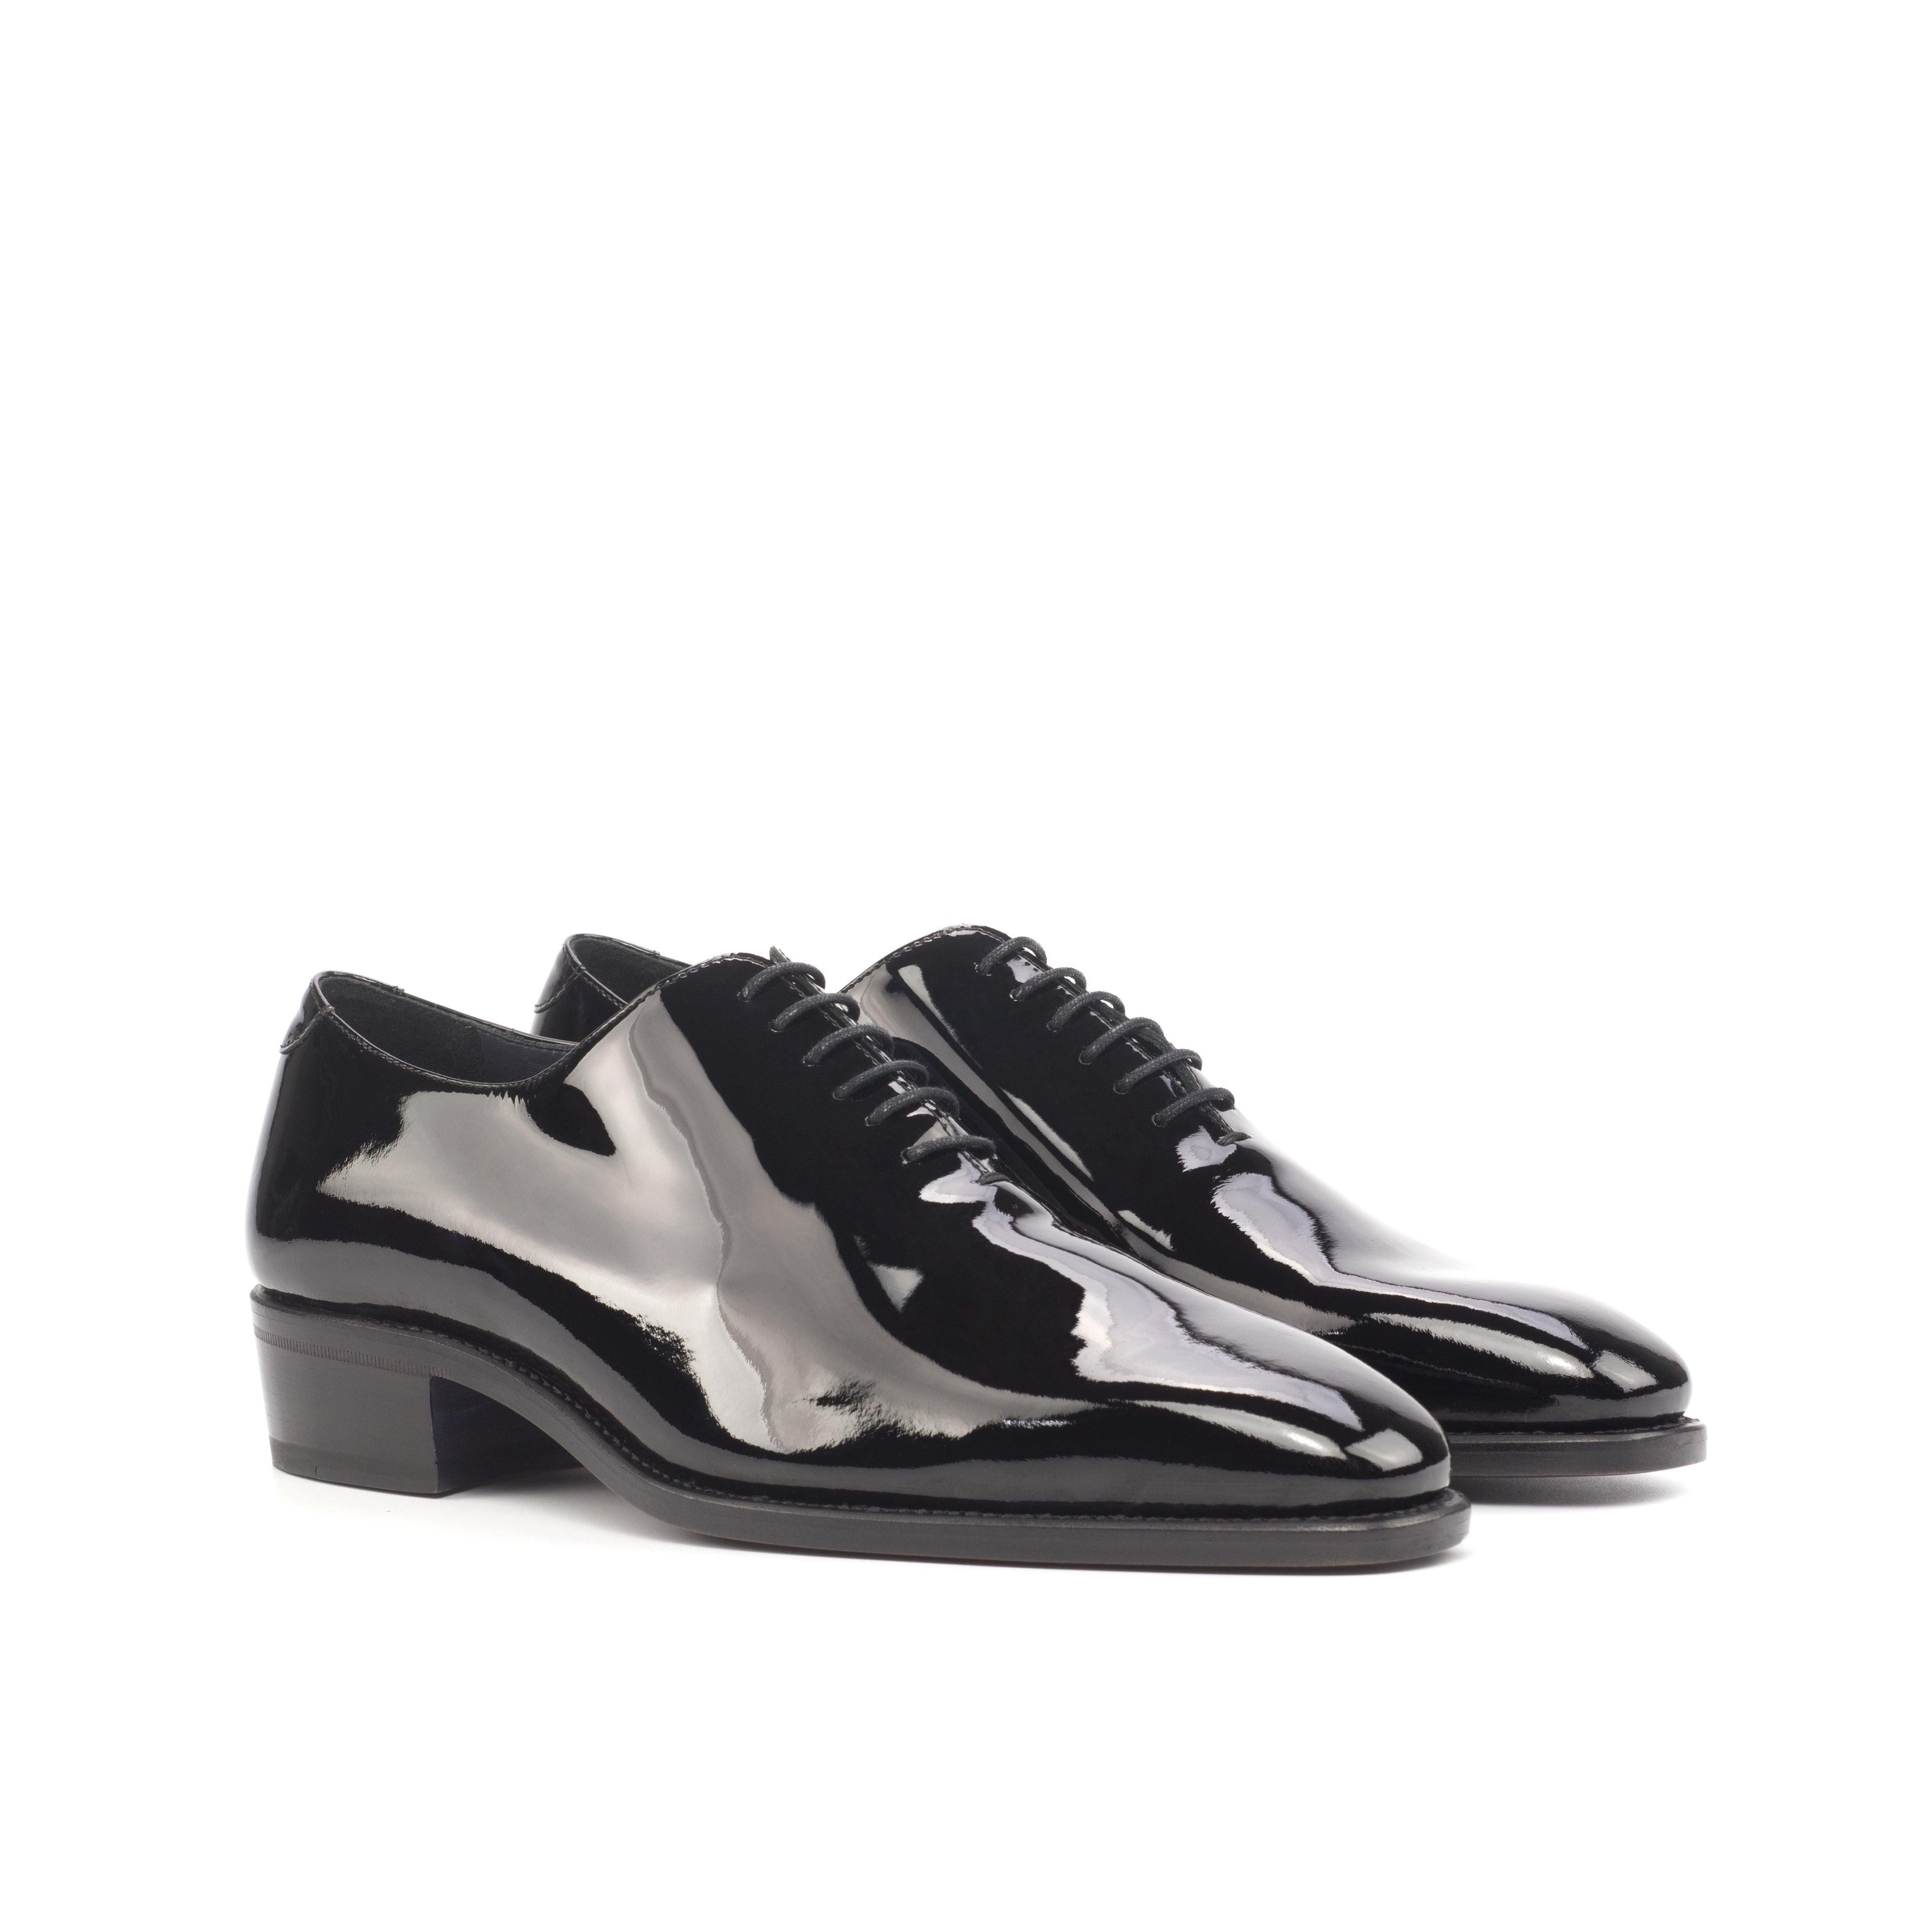 Black Patent Leather Oxford Wholecut Formal Evening, US 13 Leather